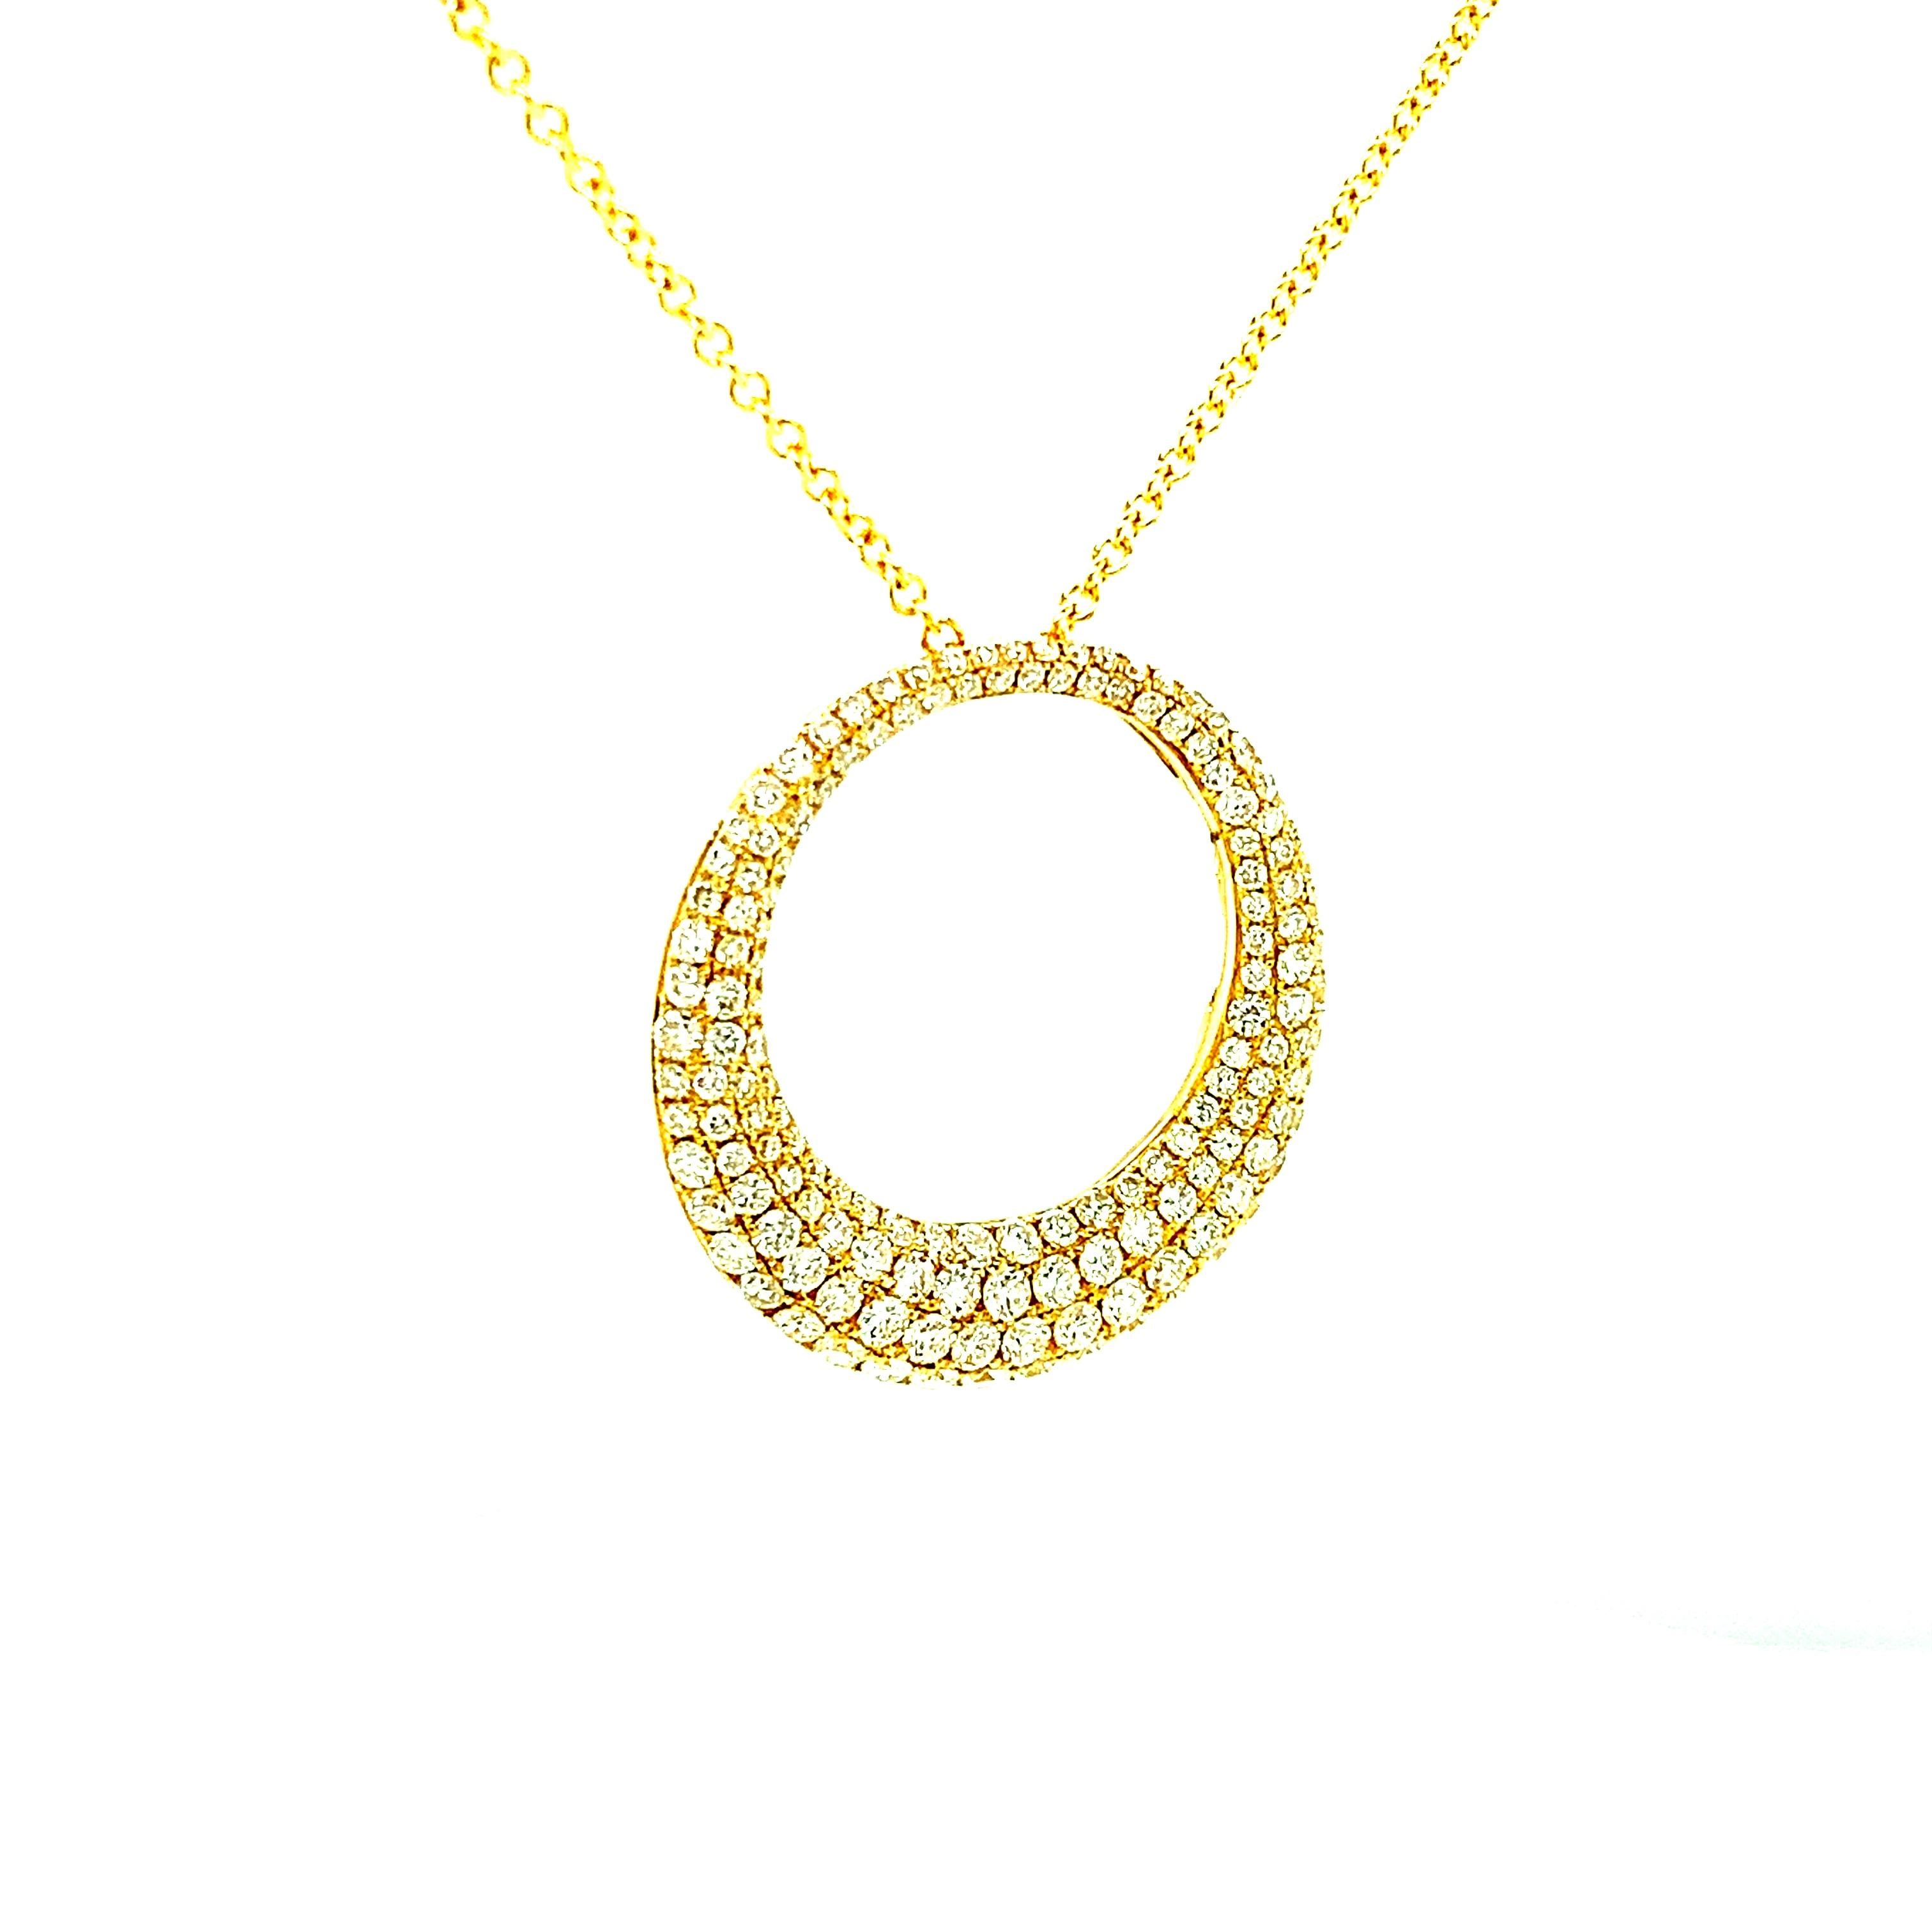 Sparkling white diamonds in graduating sizes and multiple rows are pave set in this chic, 18k yellow gold eternity circle pendant that slides on a beautiful 18k yellow gold link chain. The pendant is wider at the bottom than the top, giving it an